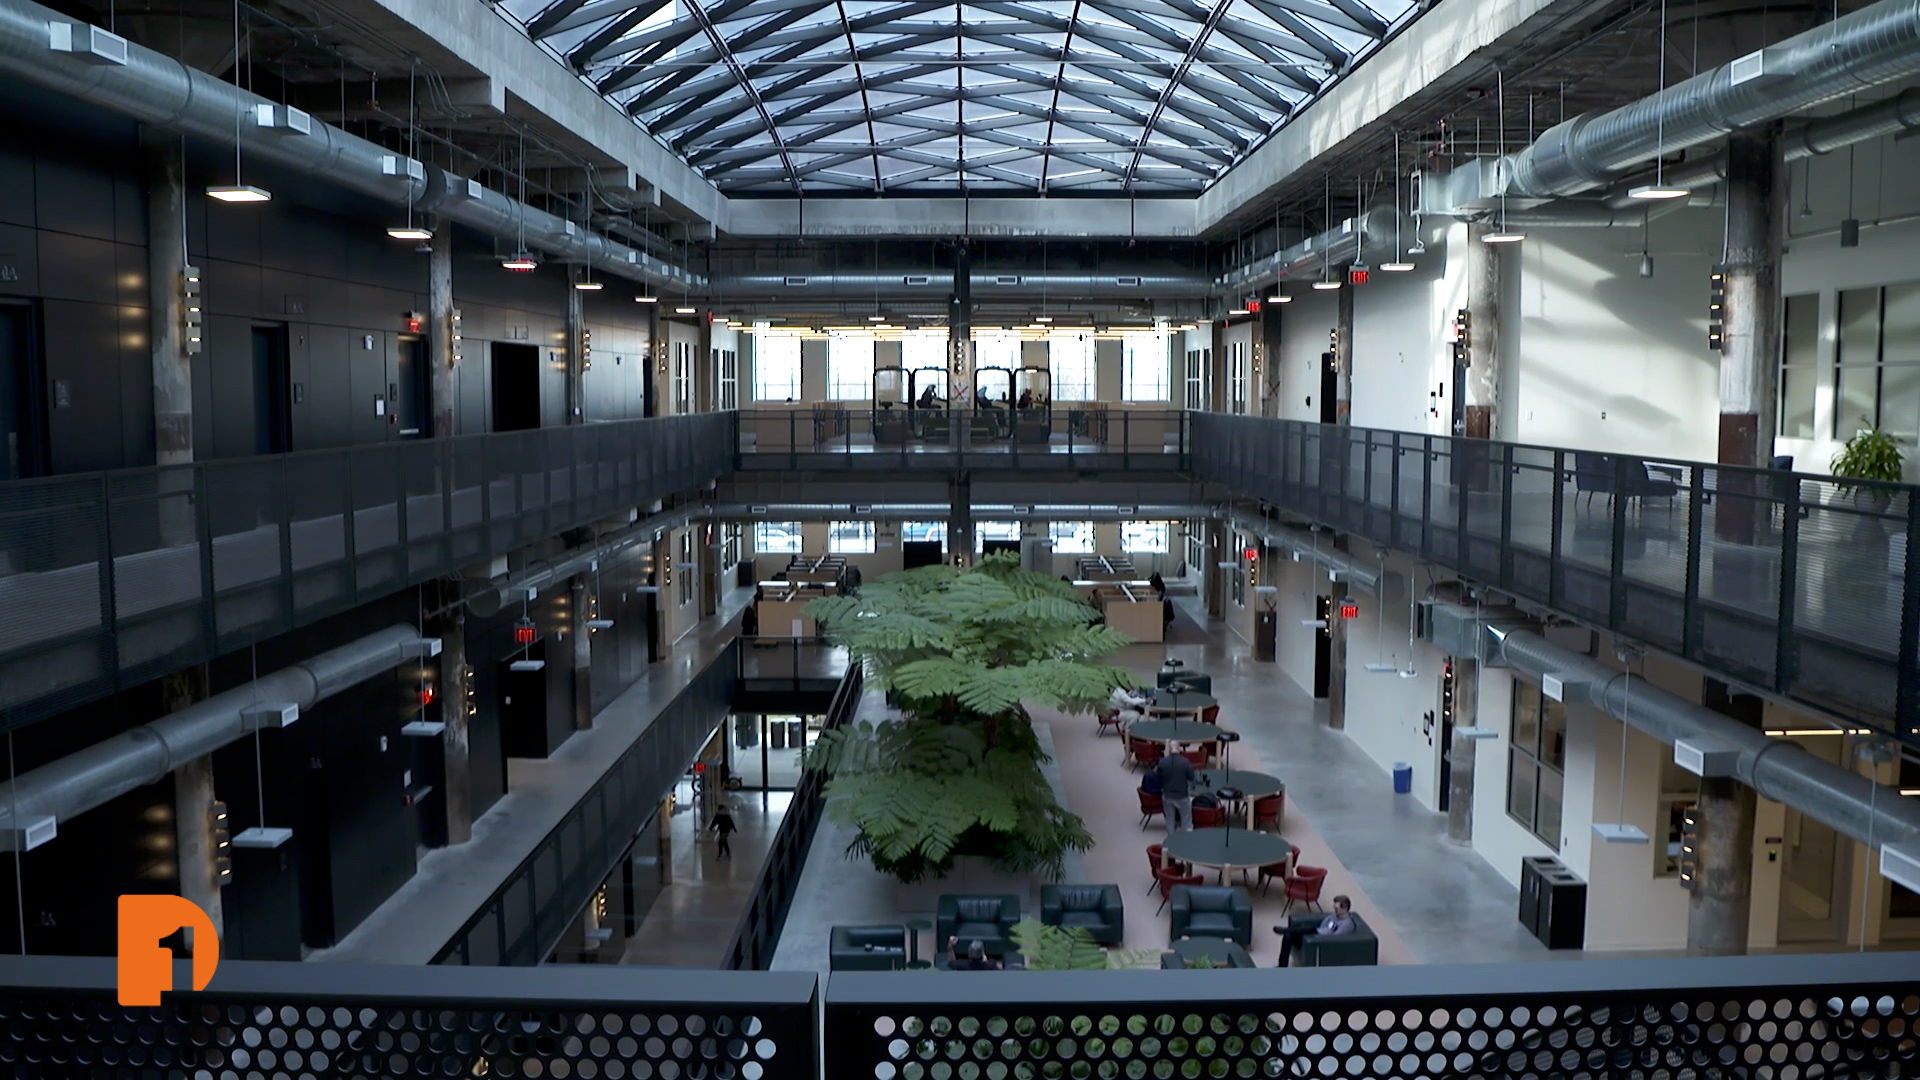 Newlab at Michigan Central: Detroit’s Revitalization as a Hub for Tech and Innovation